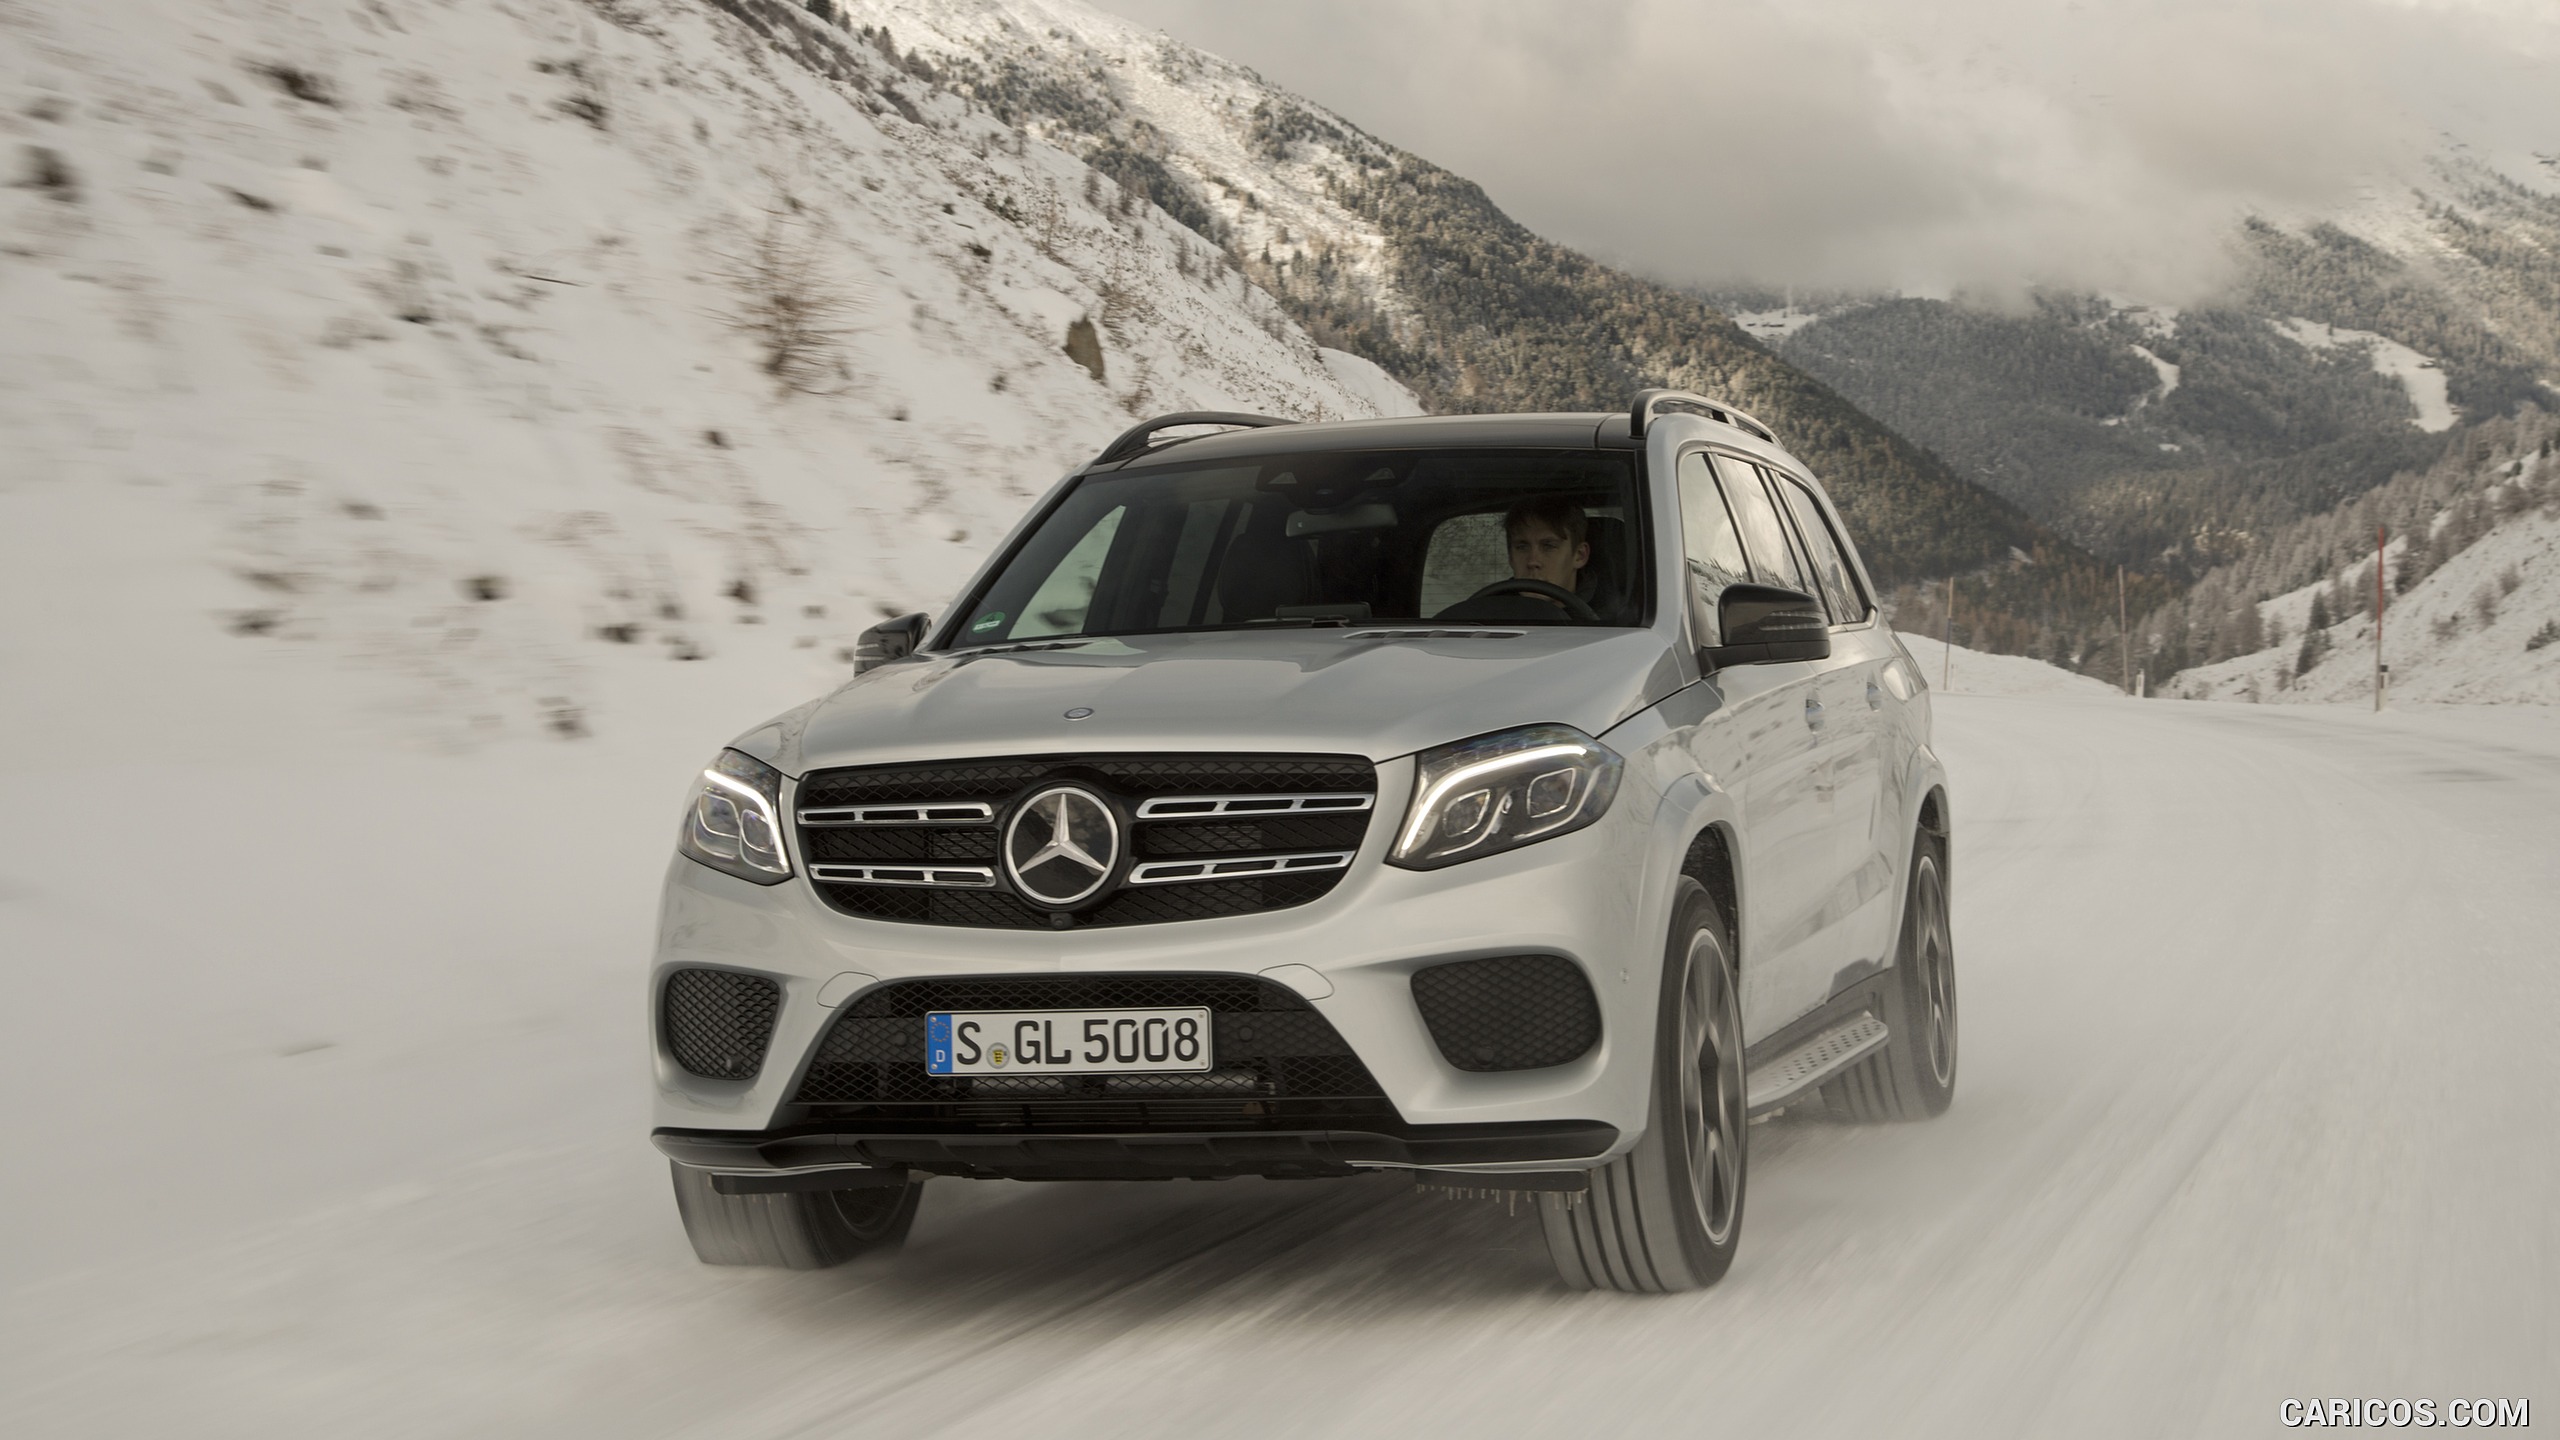 2017 Mercedes-Benz GLS 500 4MATIC AMG Line in Snow - Front, #124 of 255